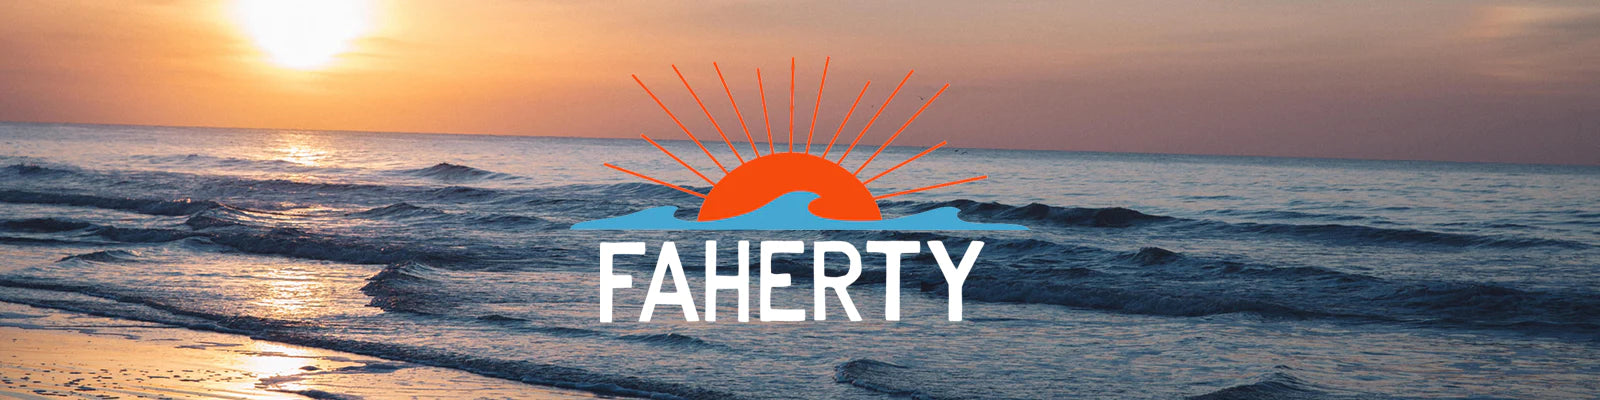 Faherty New Arrivals Landing Page